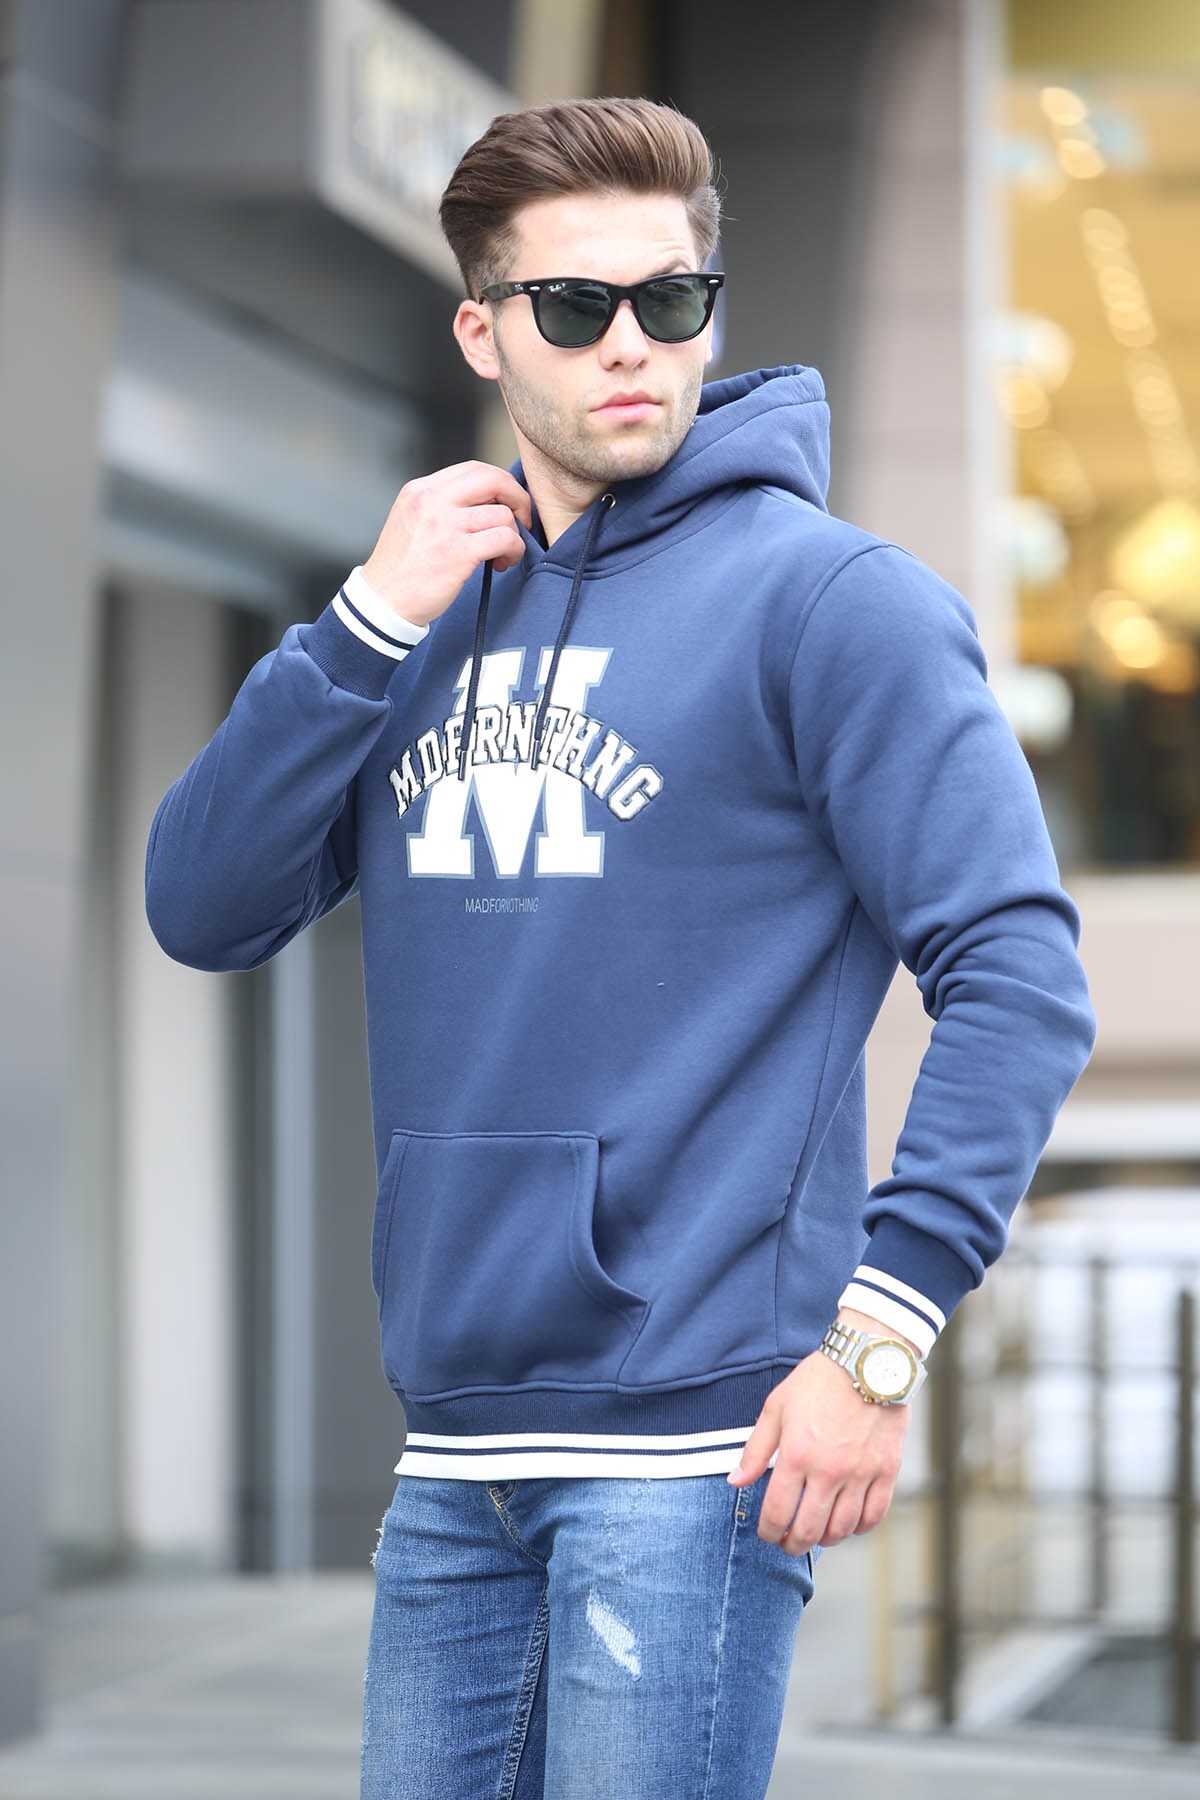 Madmext Navy Blue Embroidered Hooded Sweatshirt 6012